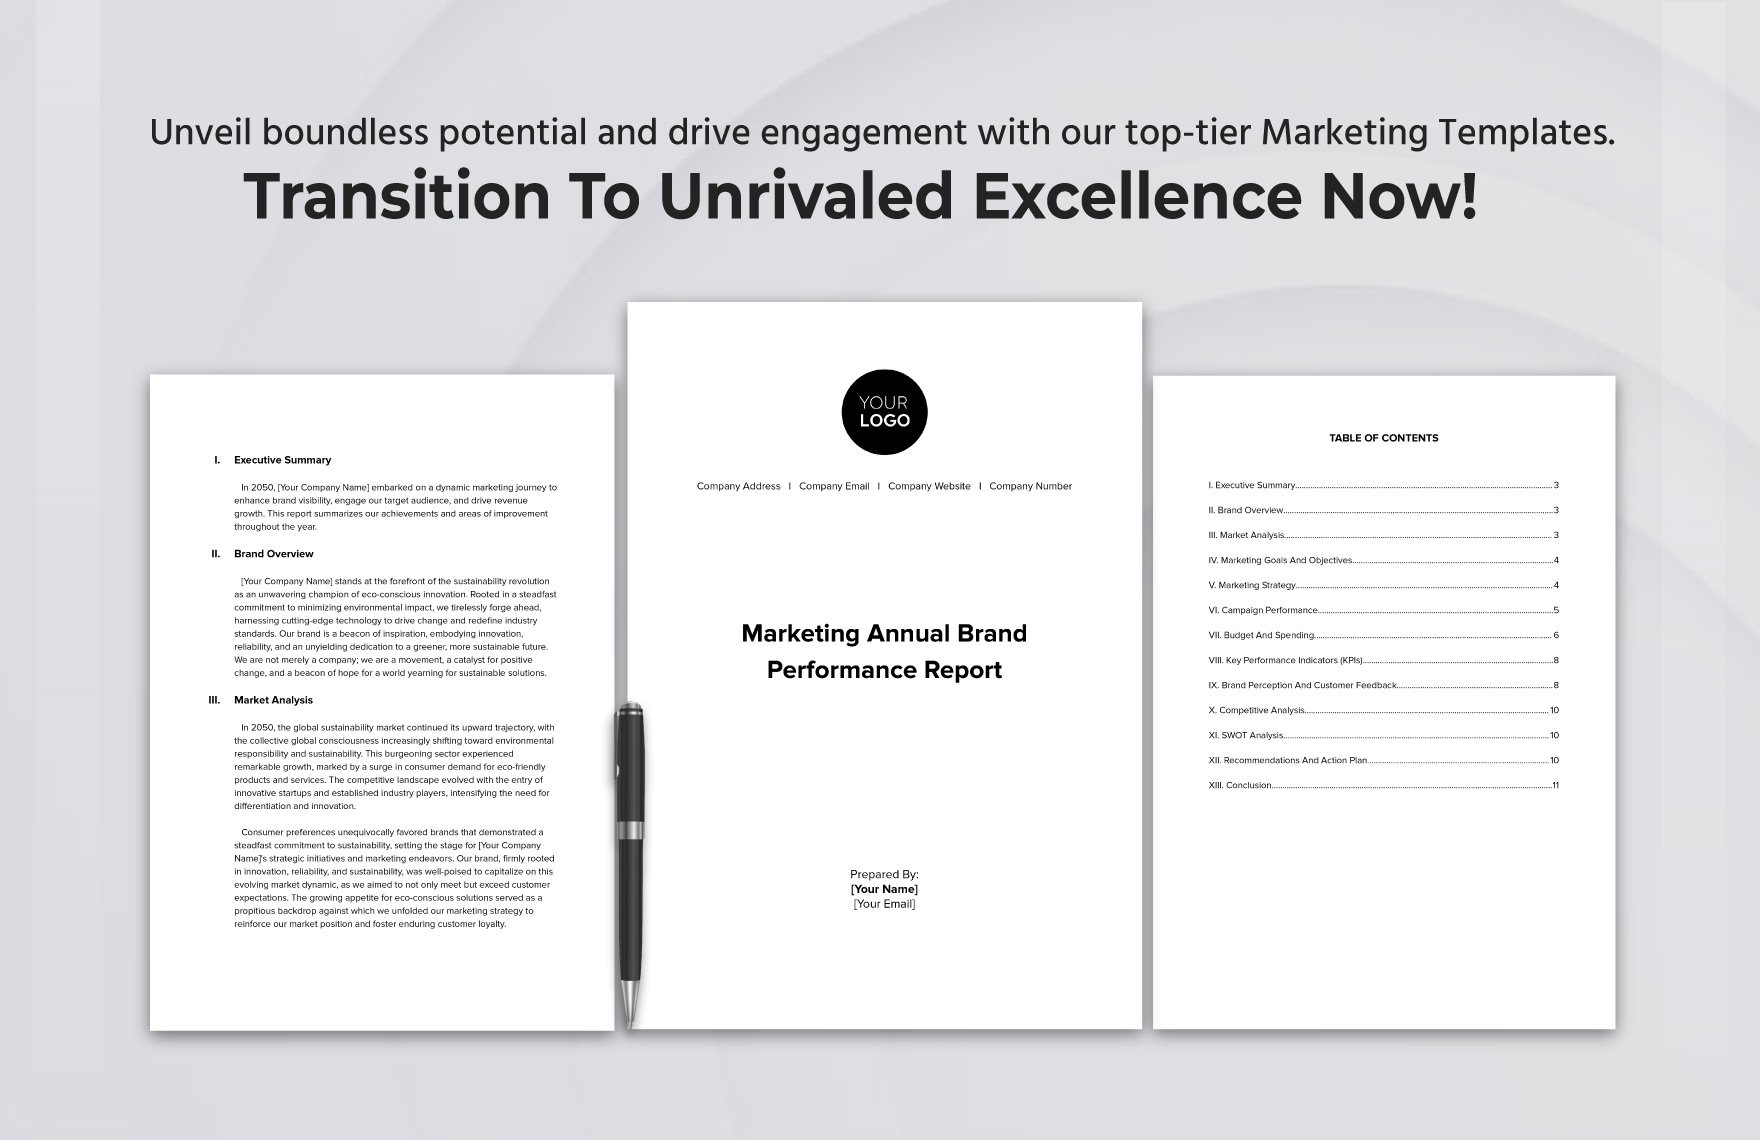 Marketing Annual Brand Performance Report Template